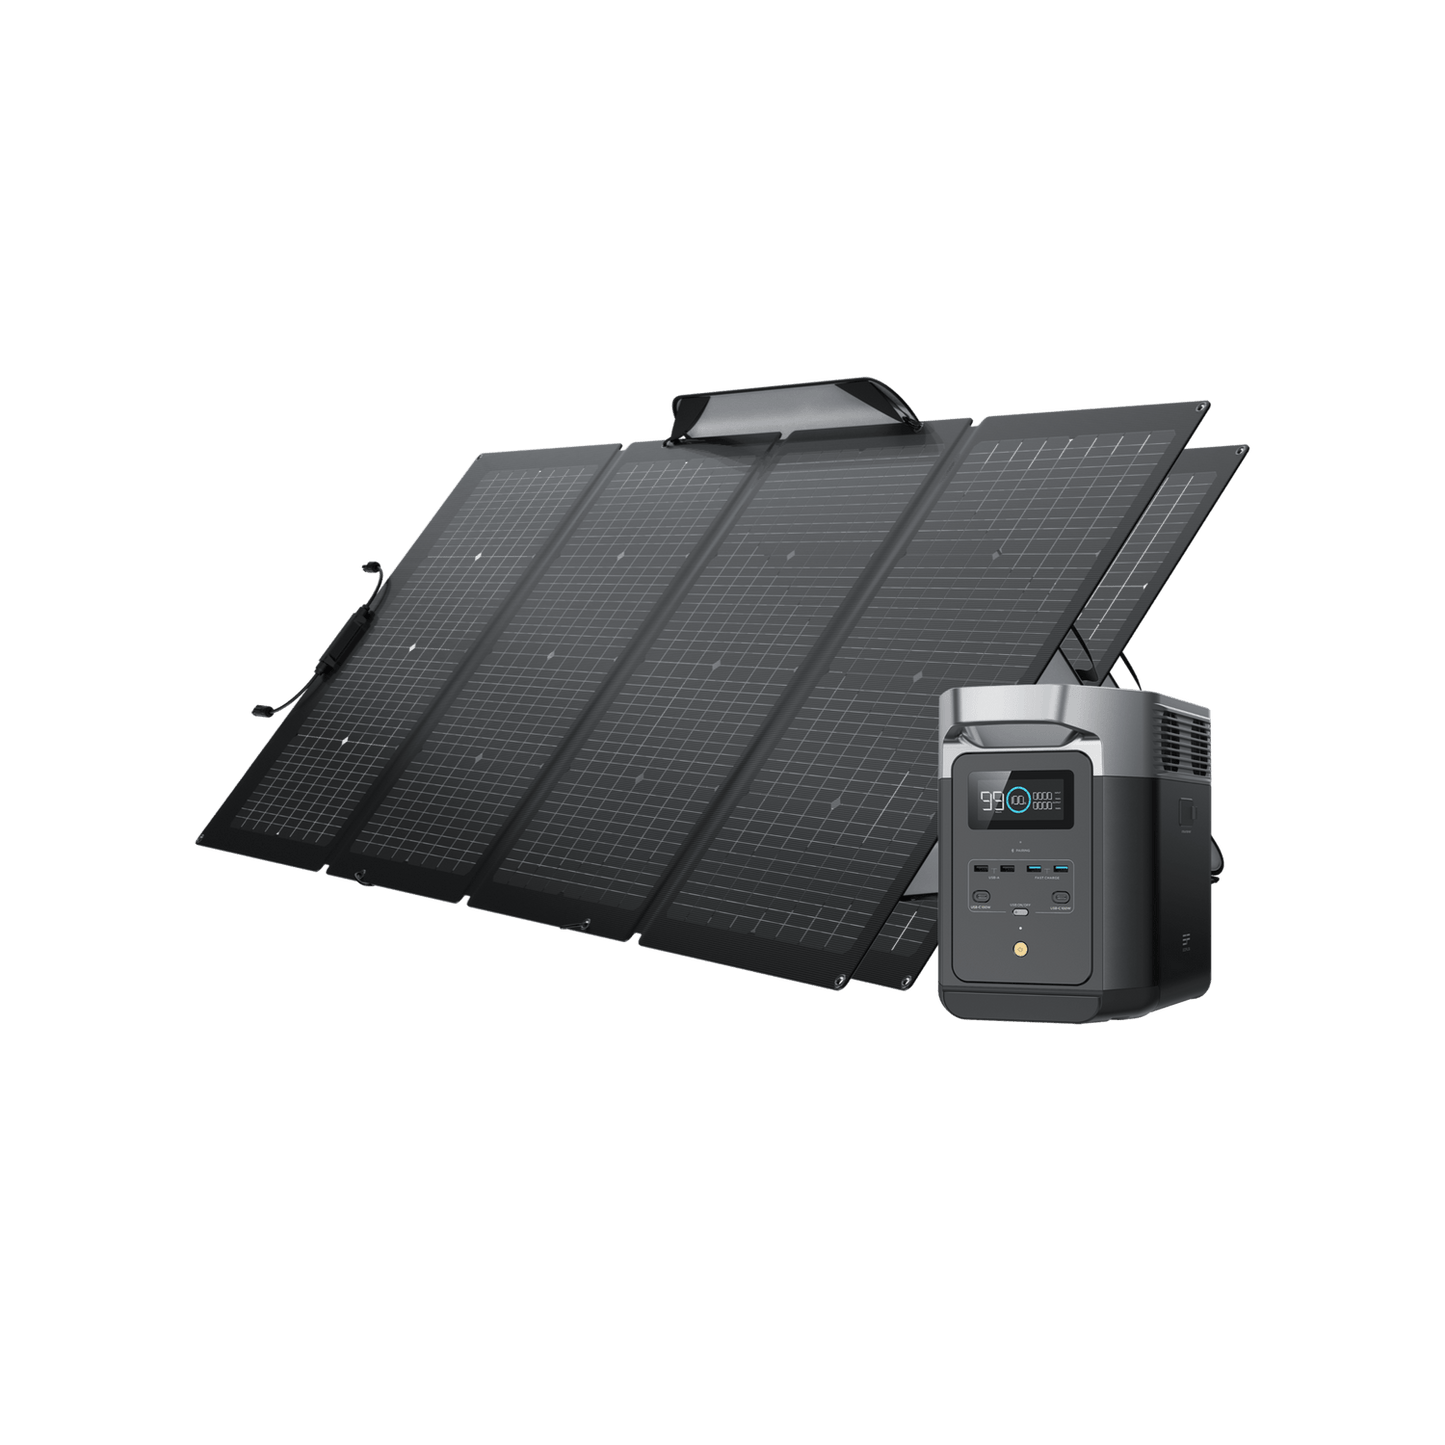 EcoFlow DELTA 2 + 160W Portable Solar Panel - Fast Charging, Solar Generator for Home Backup Power, Camping & RVs